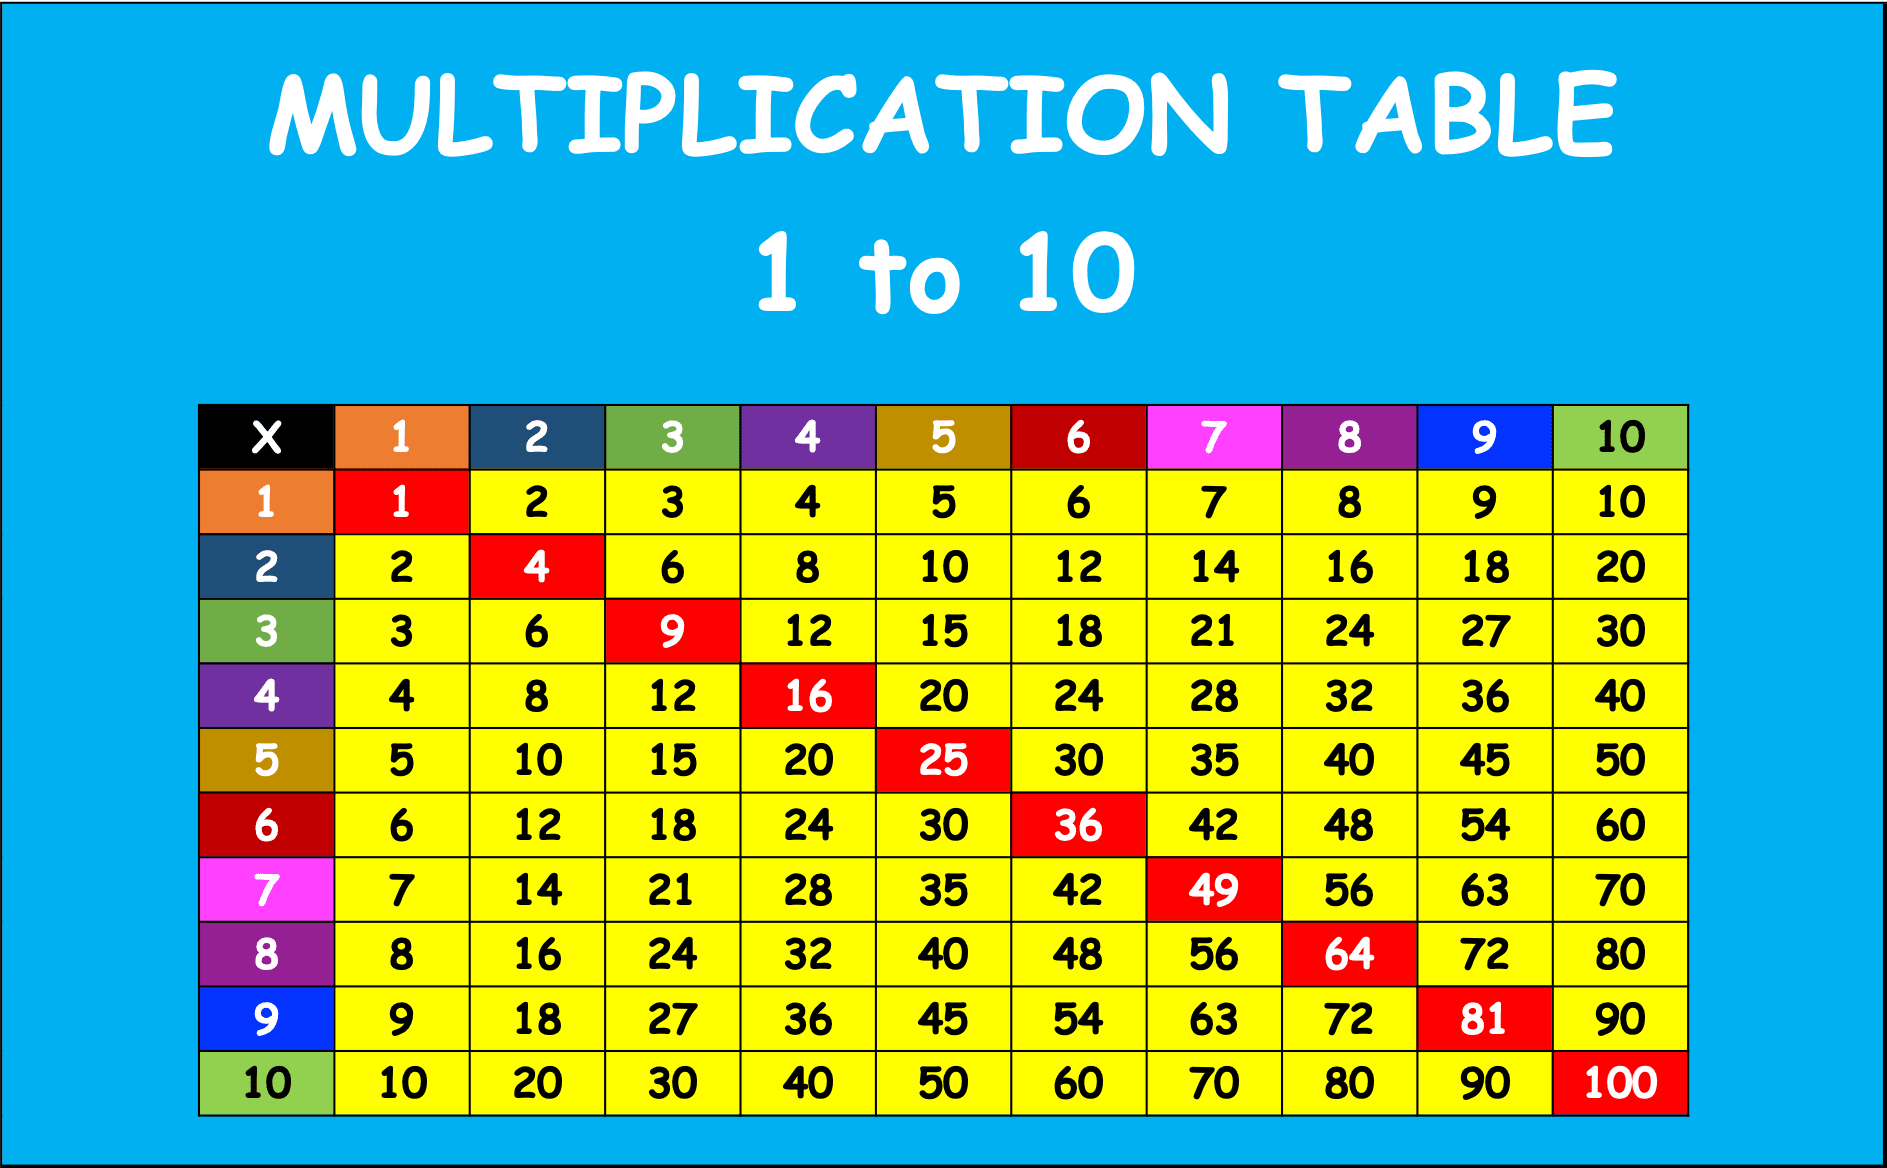 Multiplication Table 1 to 10 (Free Printable Excel/PDF Download) - Screenshot of the Multiplication Table Type A from Compute Expert